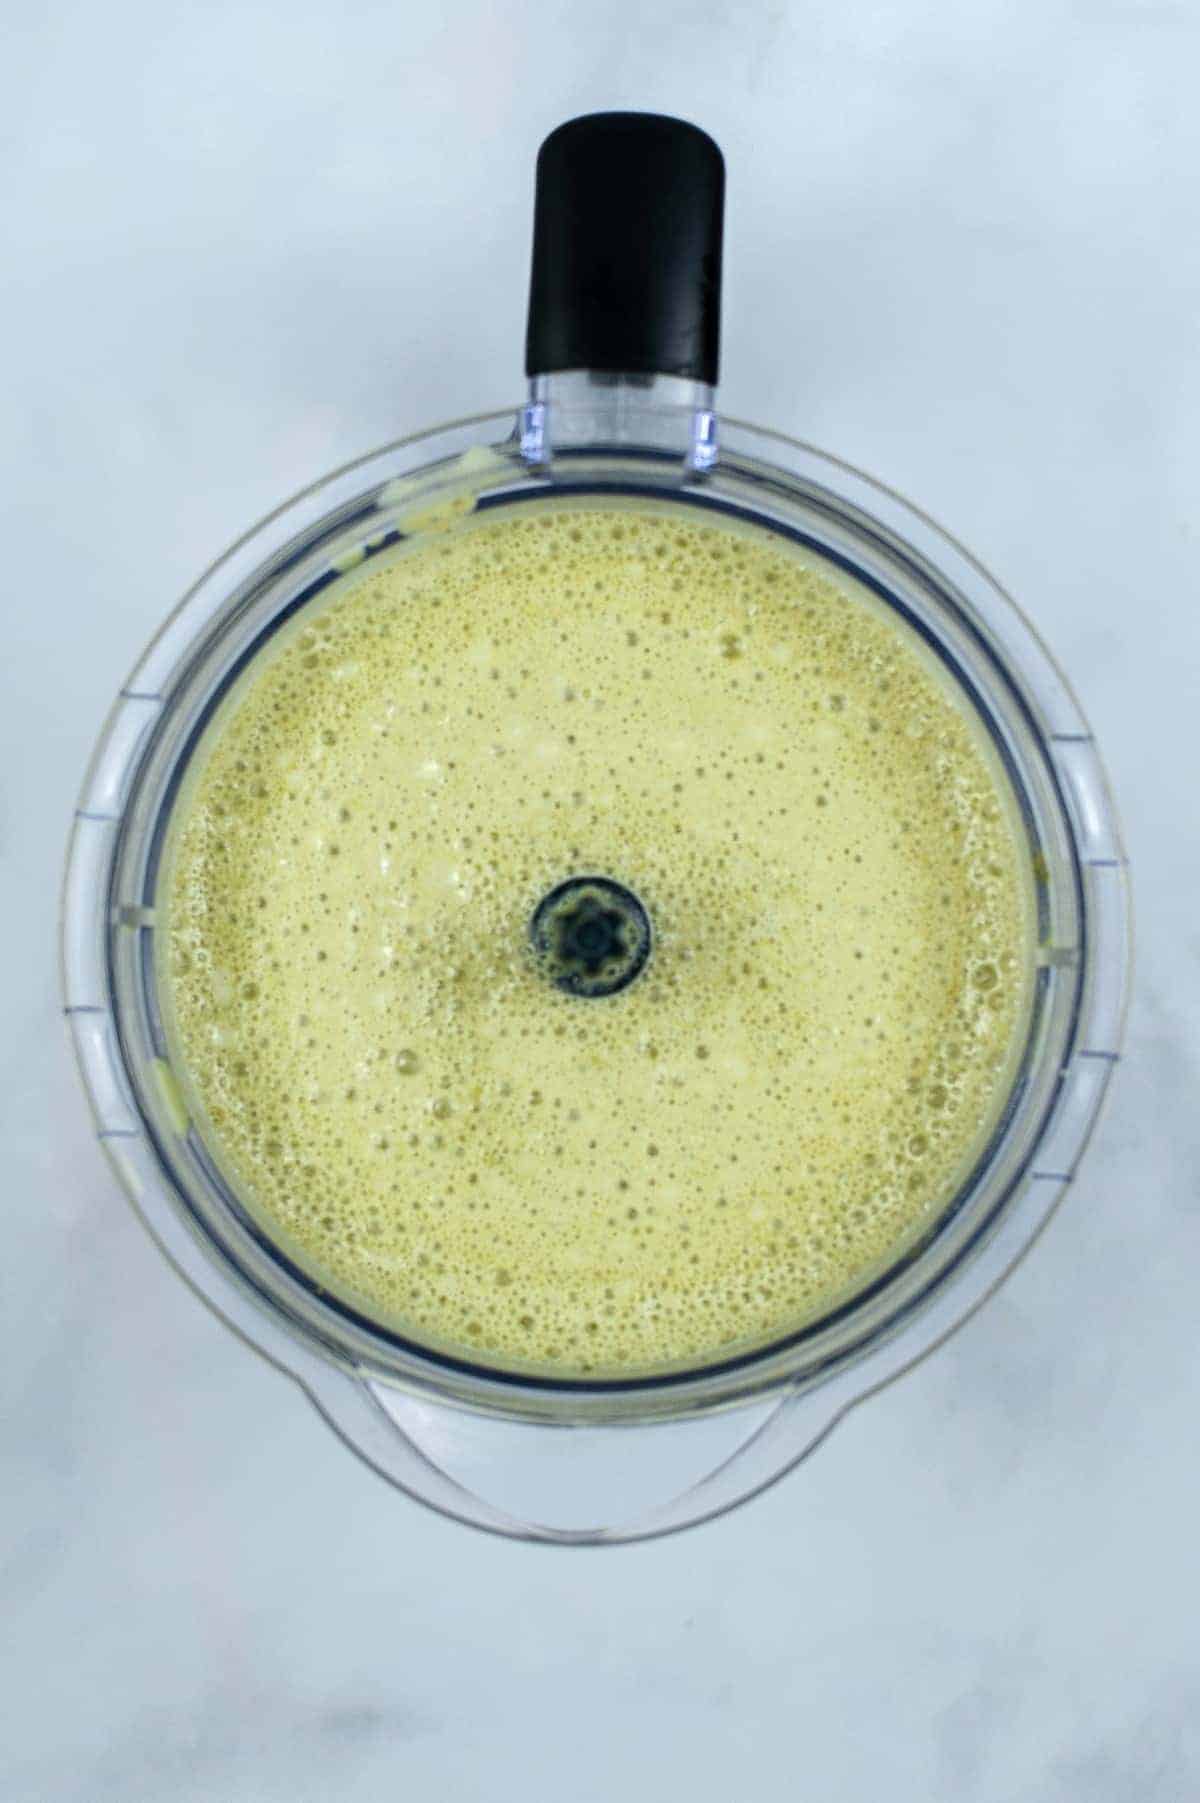 Overhead of blended and foamy matcha green tea in a blender.